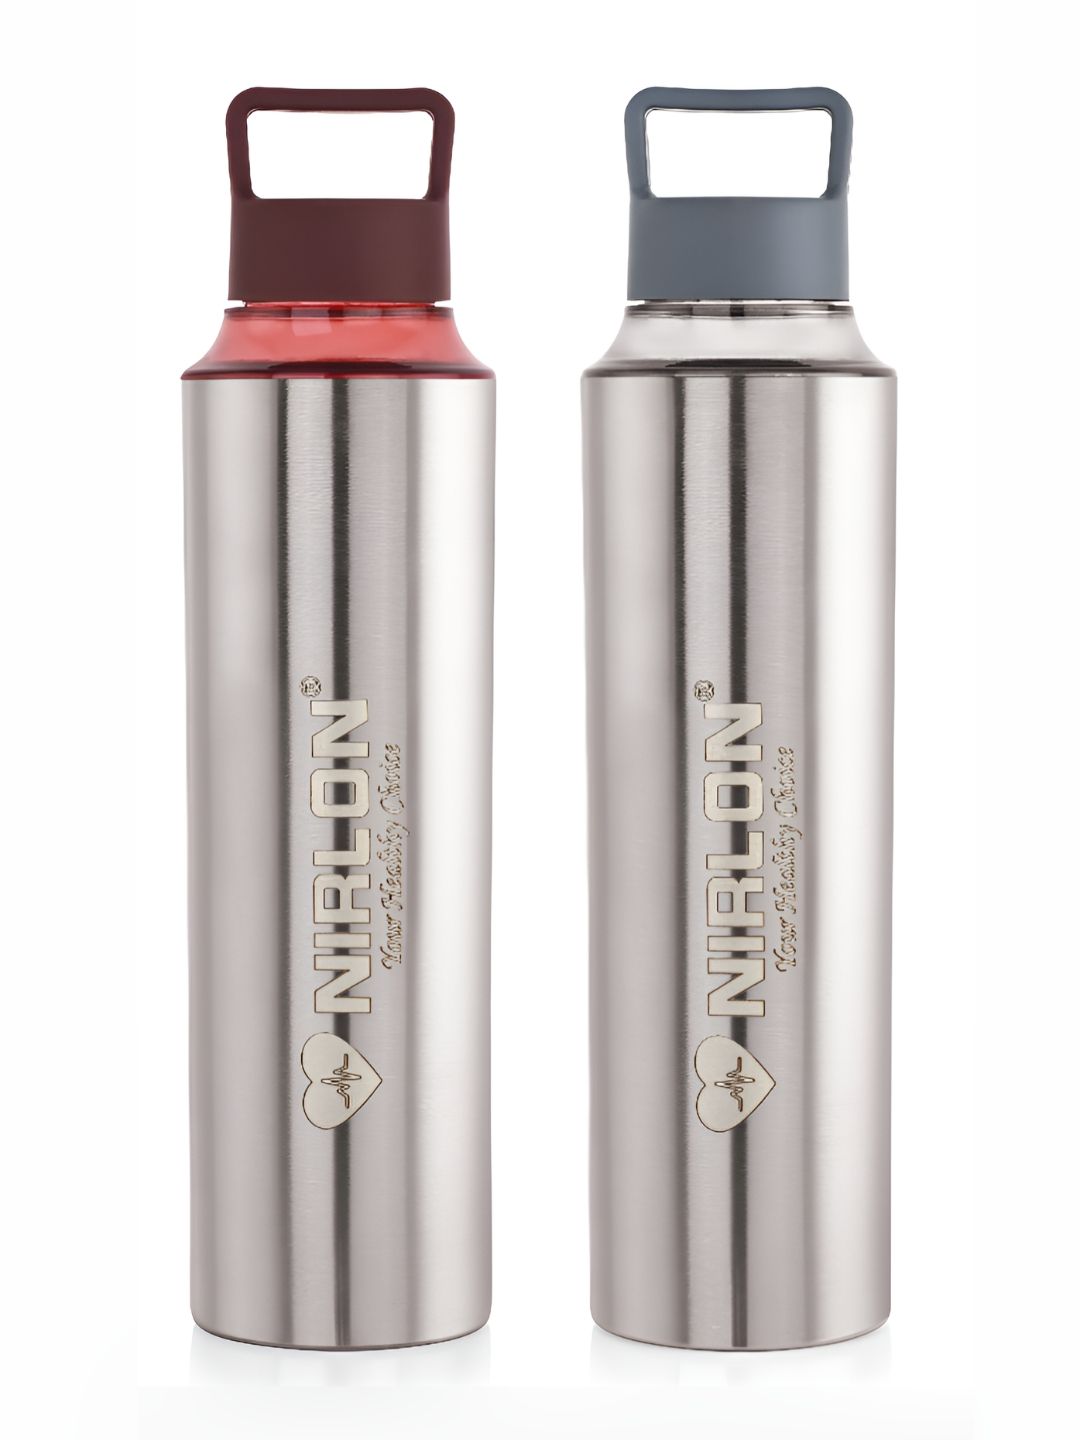 NIRLON Silver-Toned Set of 2 Stainless Steel Solid Water Bottle